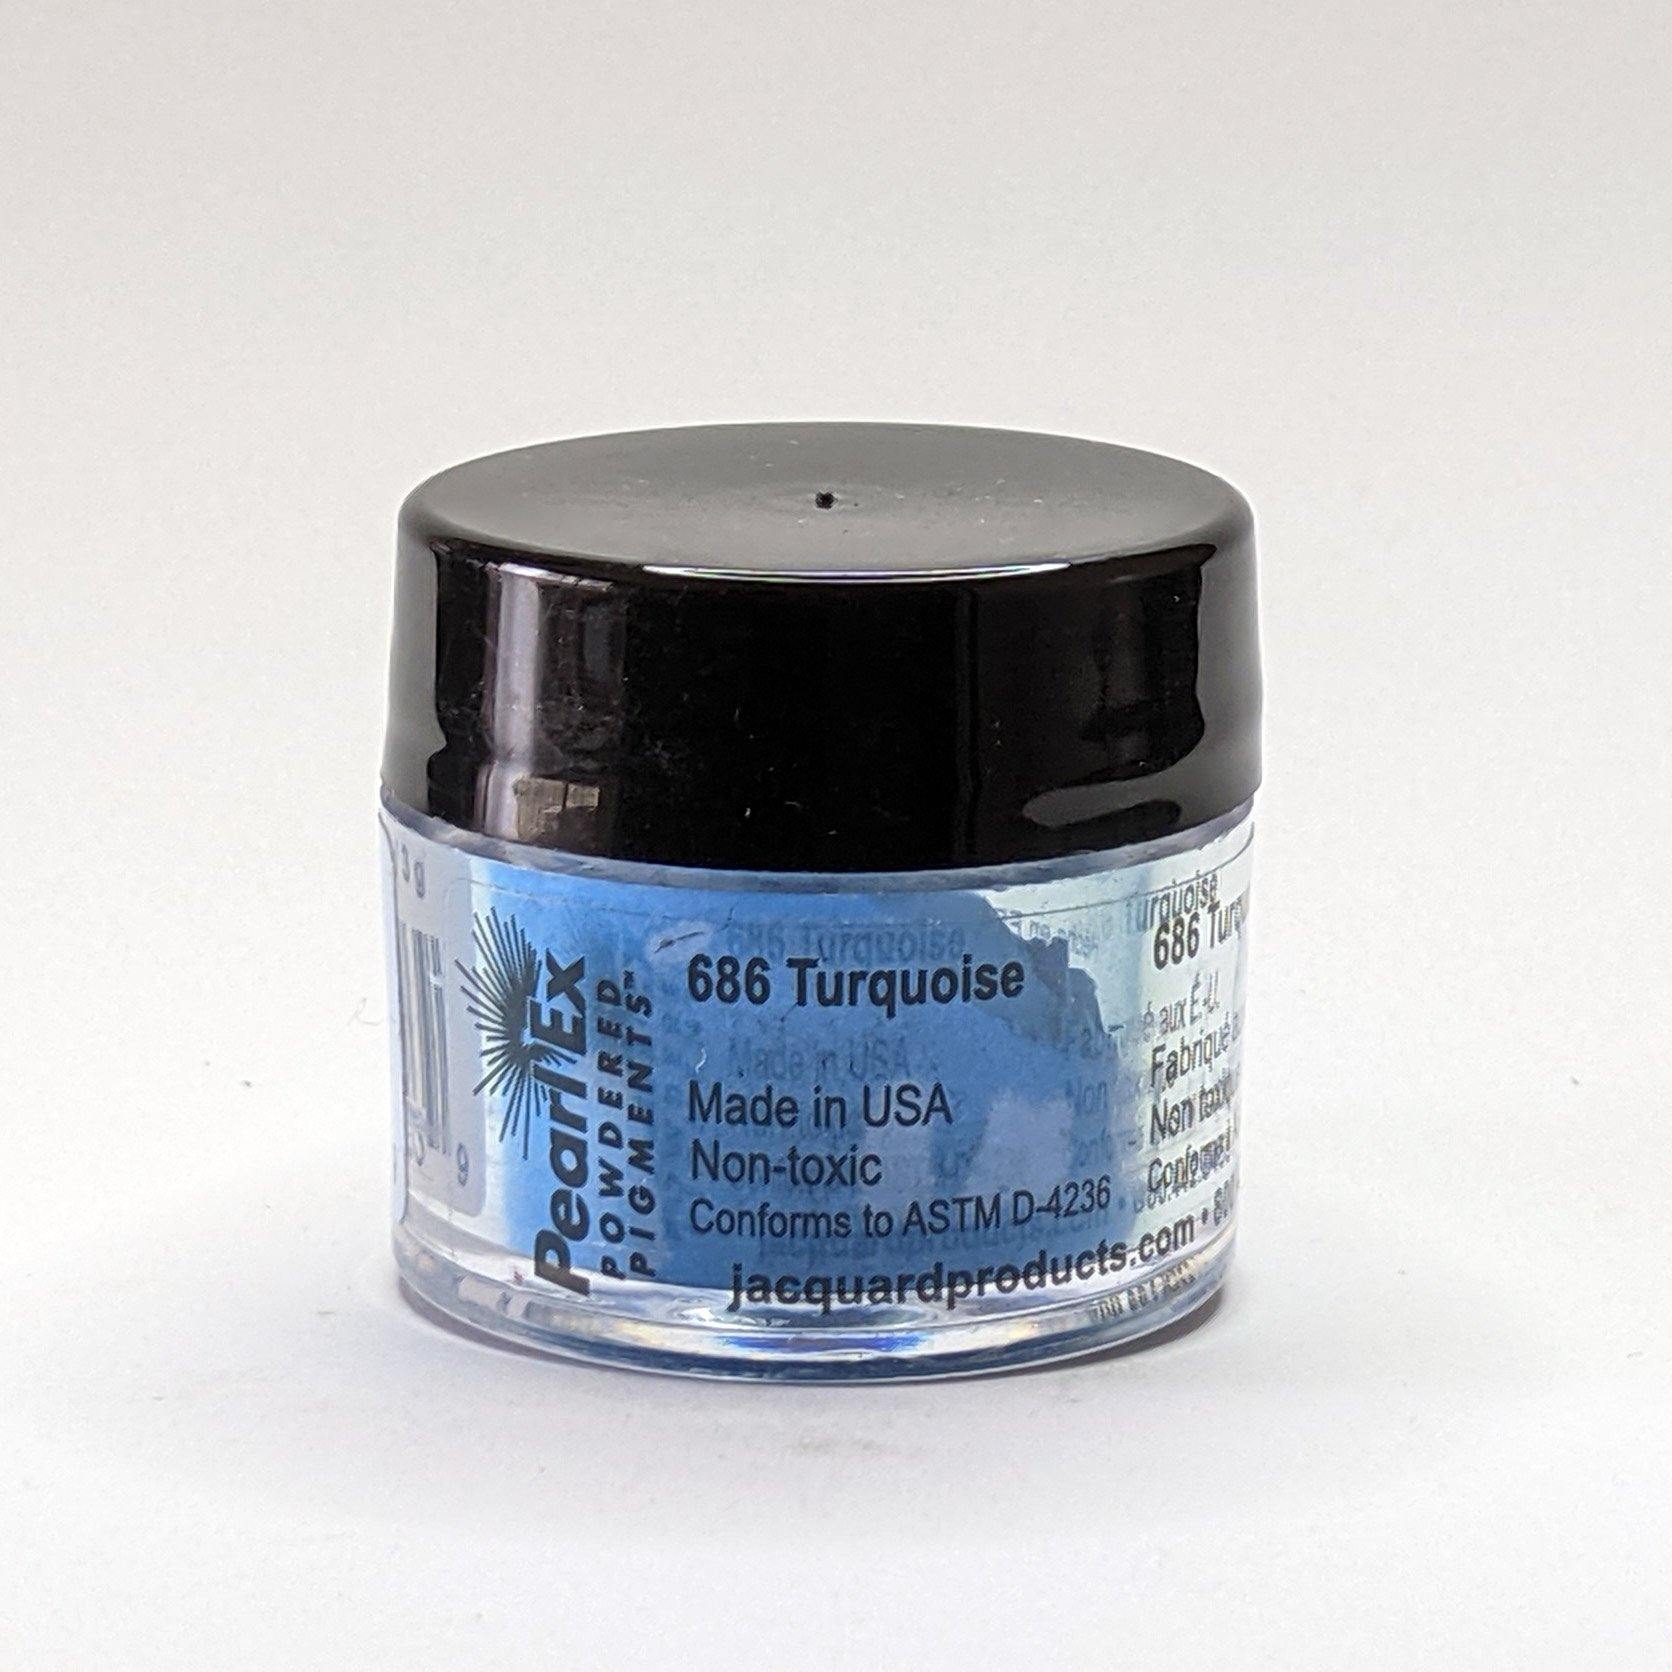 Turquoise Pearl Ex Pigment 3g - Poethan